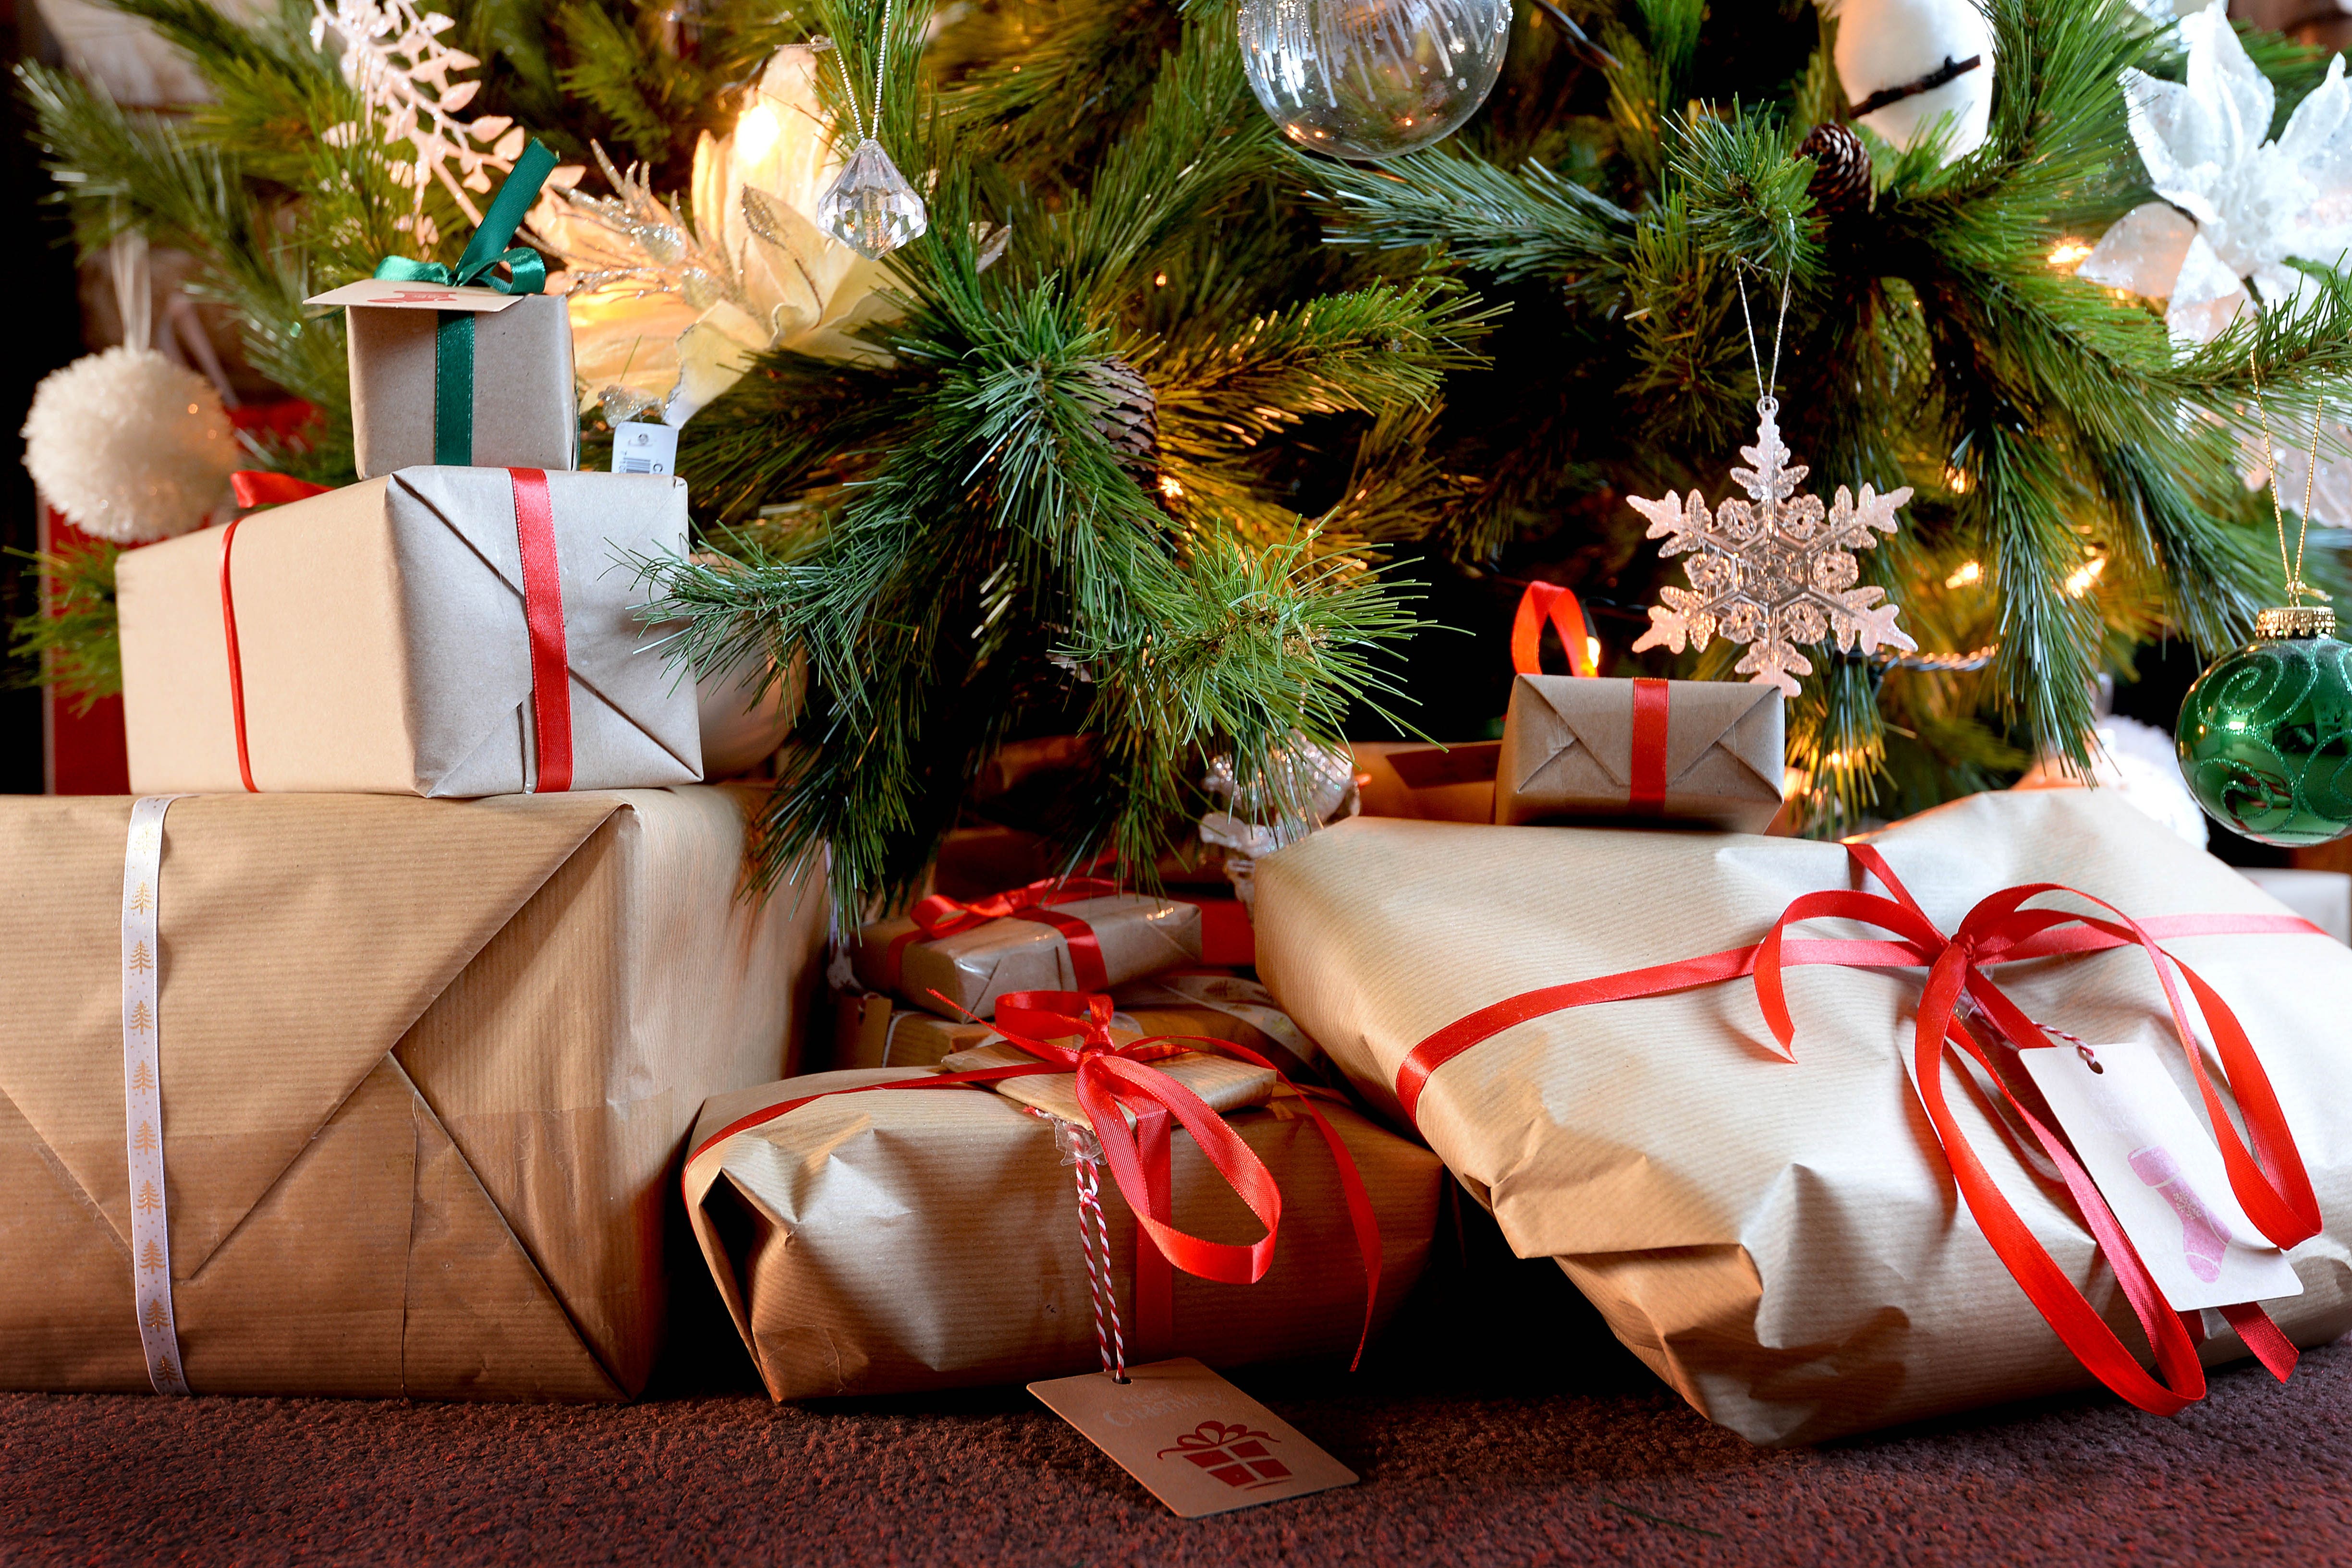 File photo dated 25/12/19 of wrapped Christmas presents under a Christmas tree.